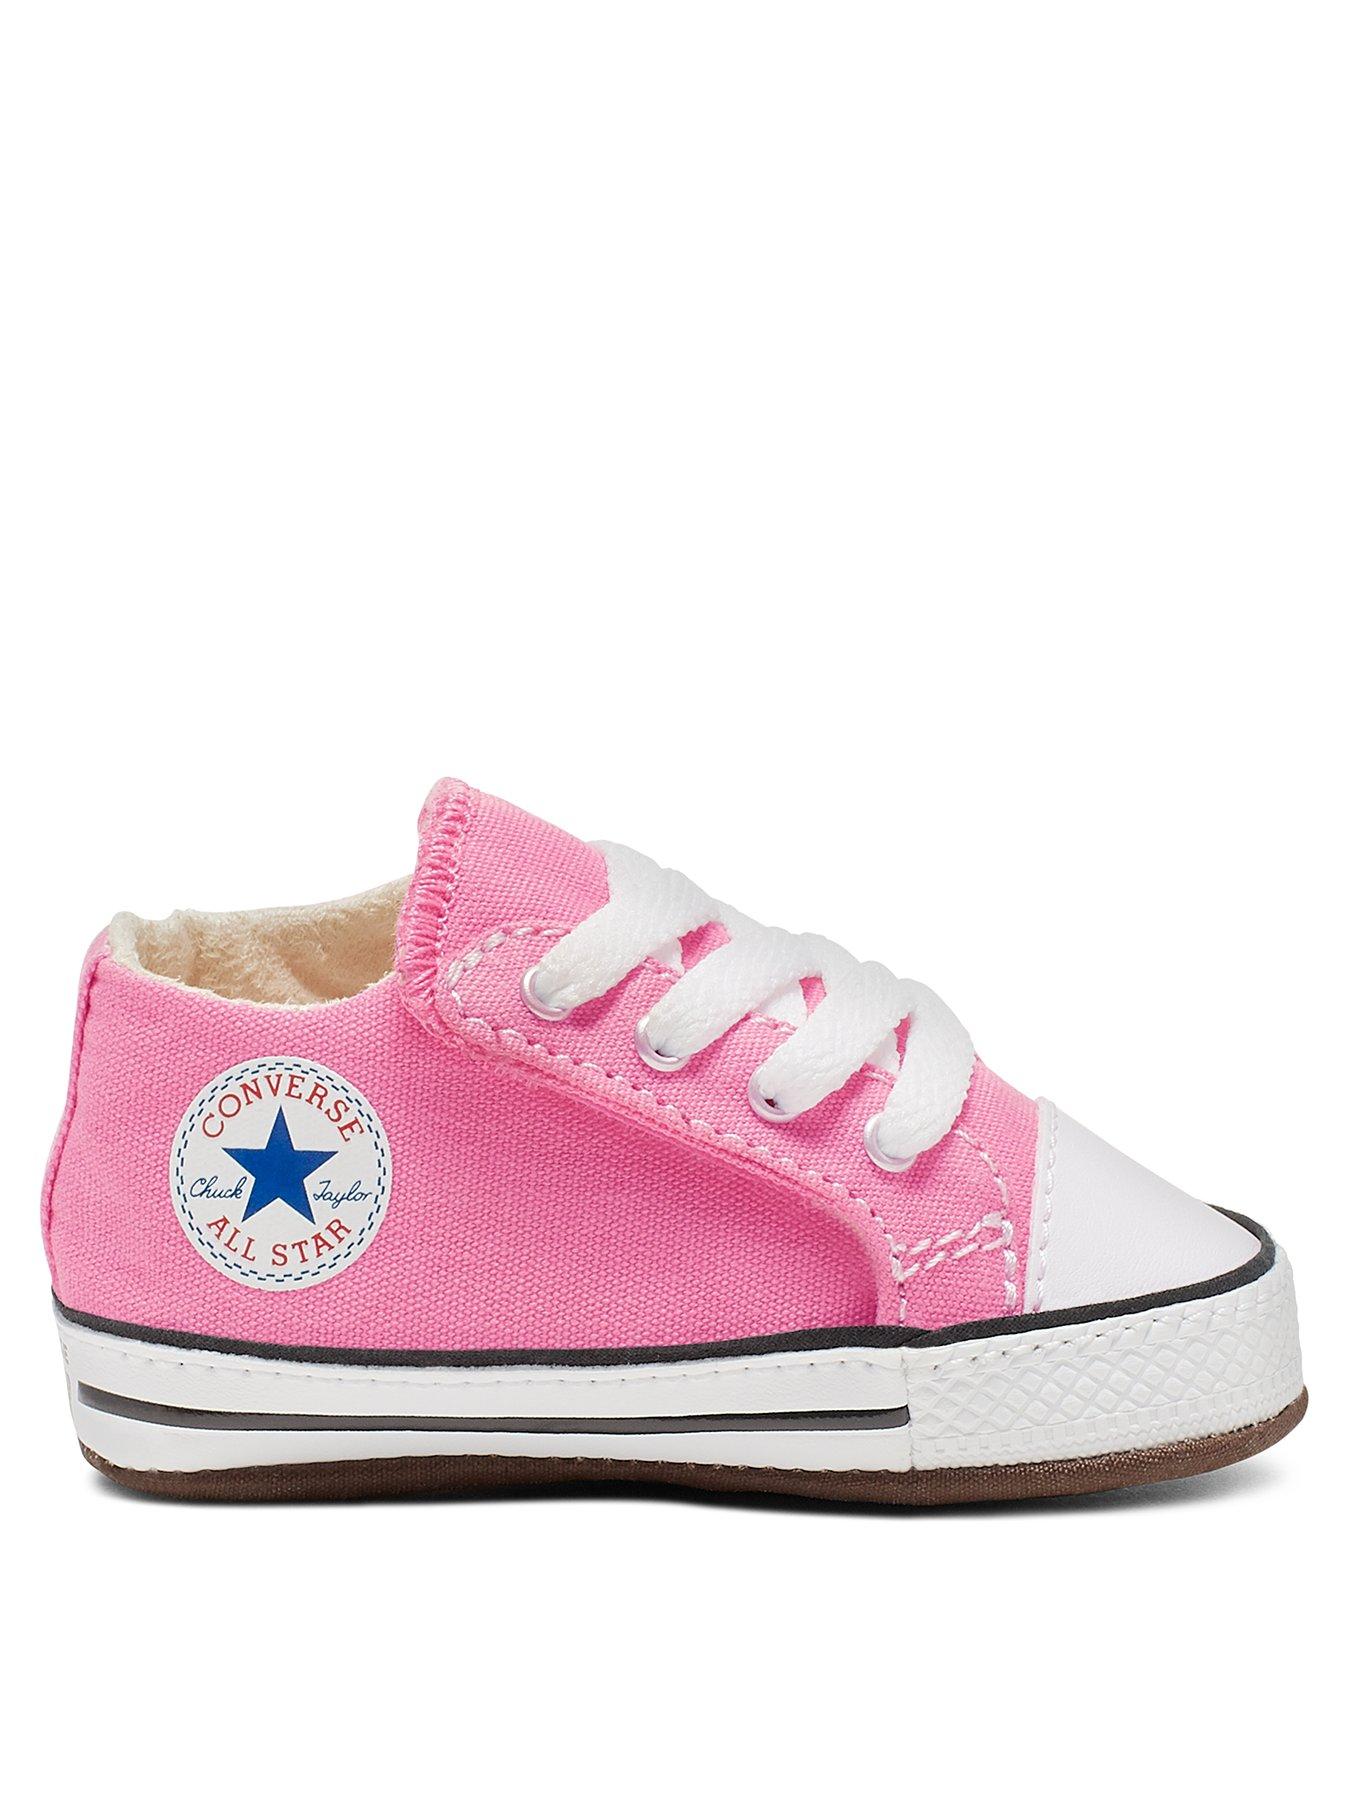 pink converse infant size 4